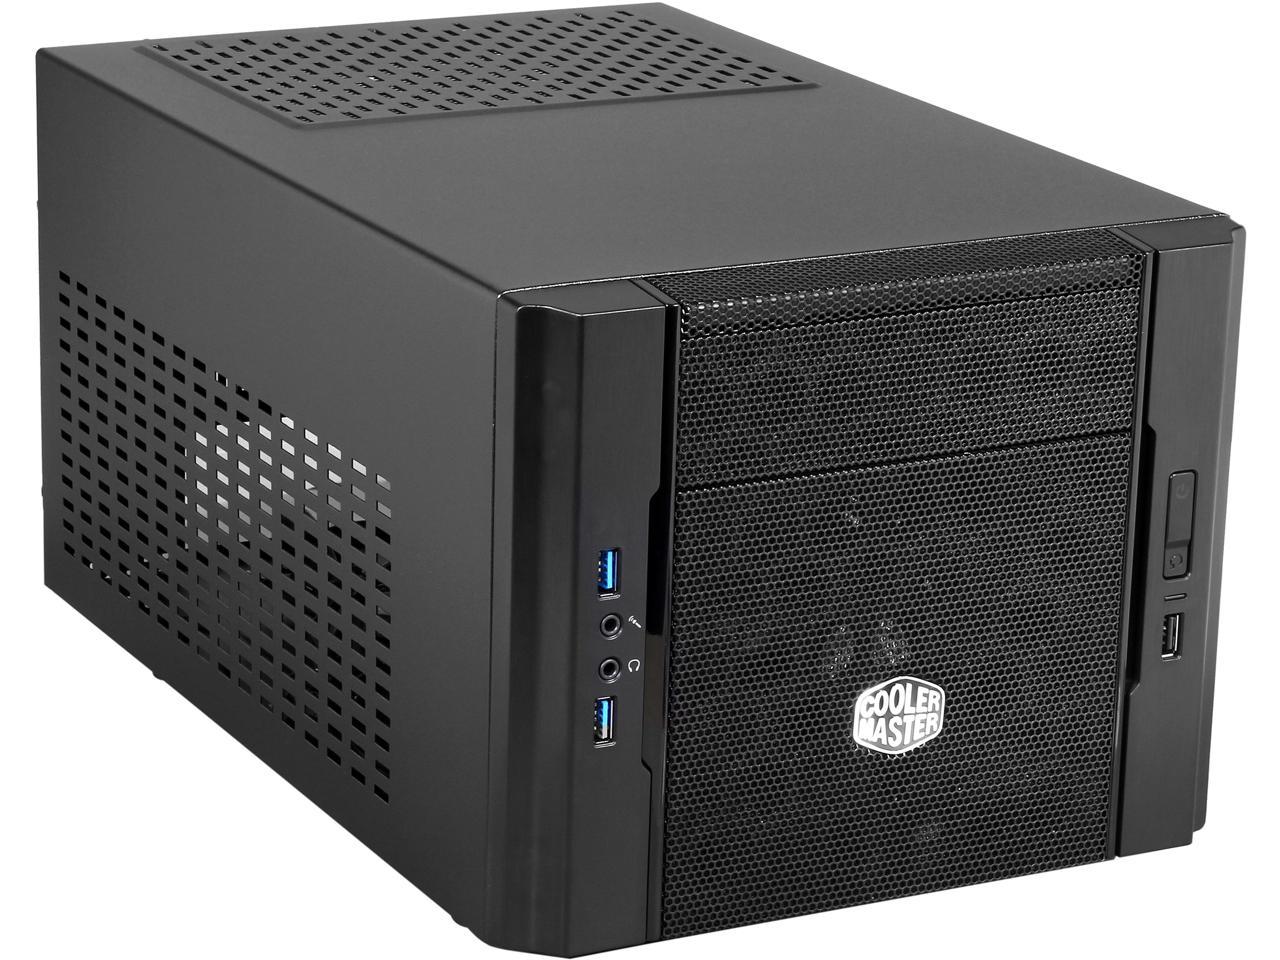 Cooler Master Elite 130 Mini Itx Computer Case With Mesh Front Panel And Water Ebay 0442